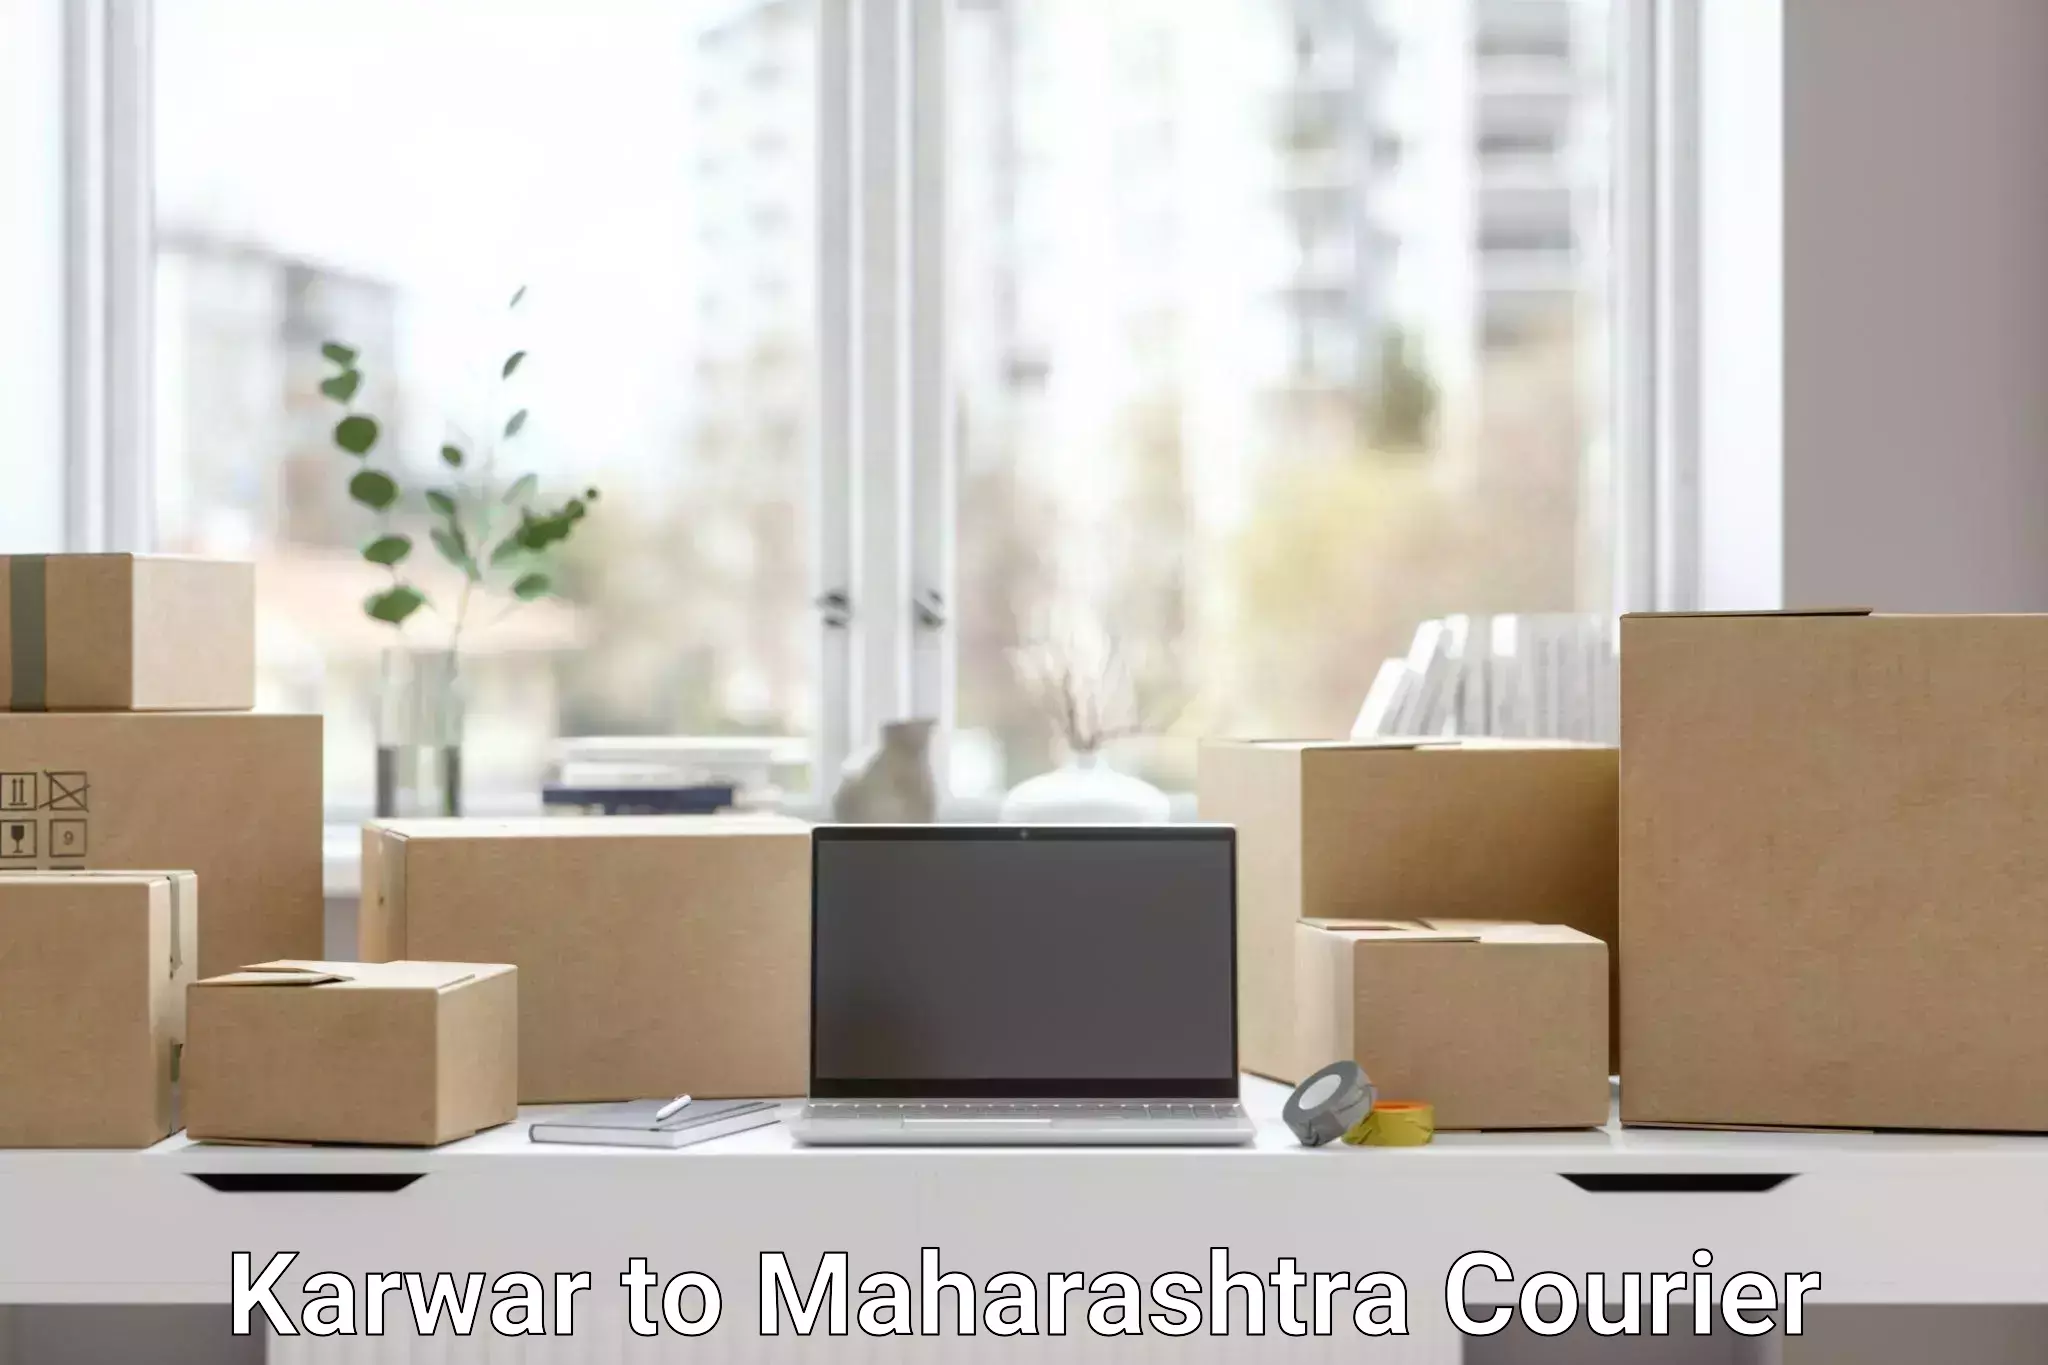 Sustainable courier practices Karwar to Maharashtra